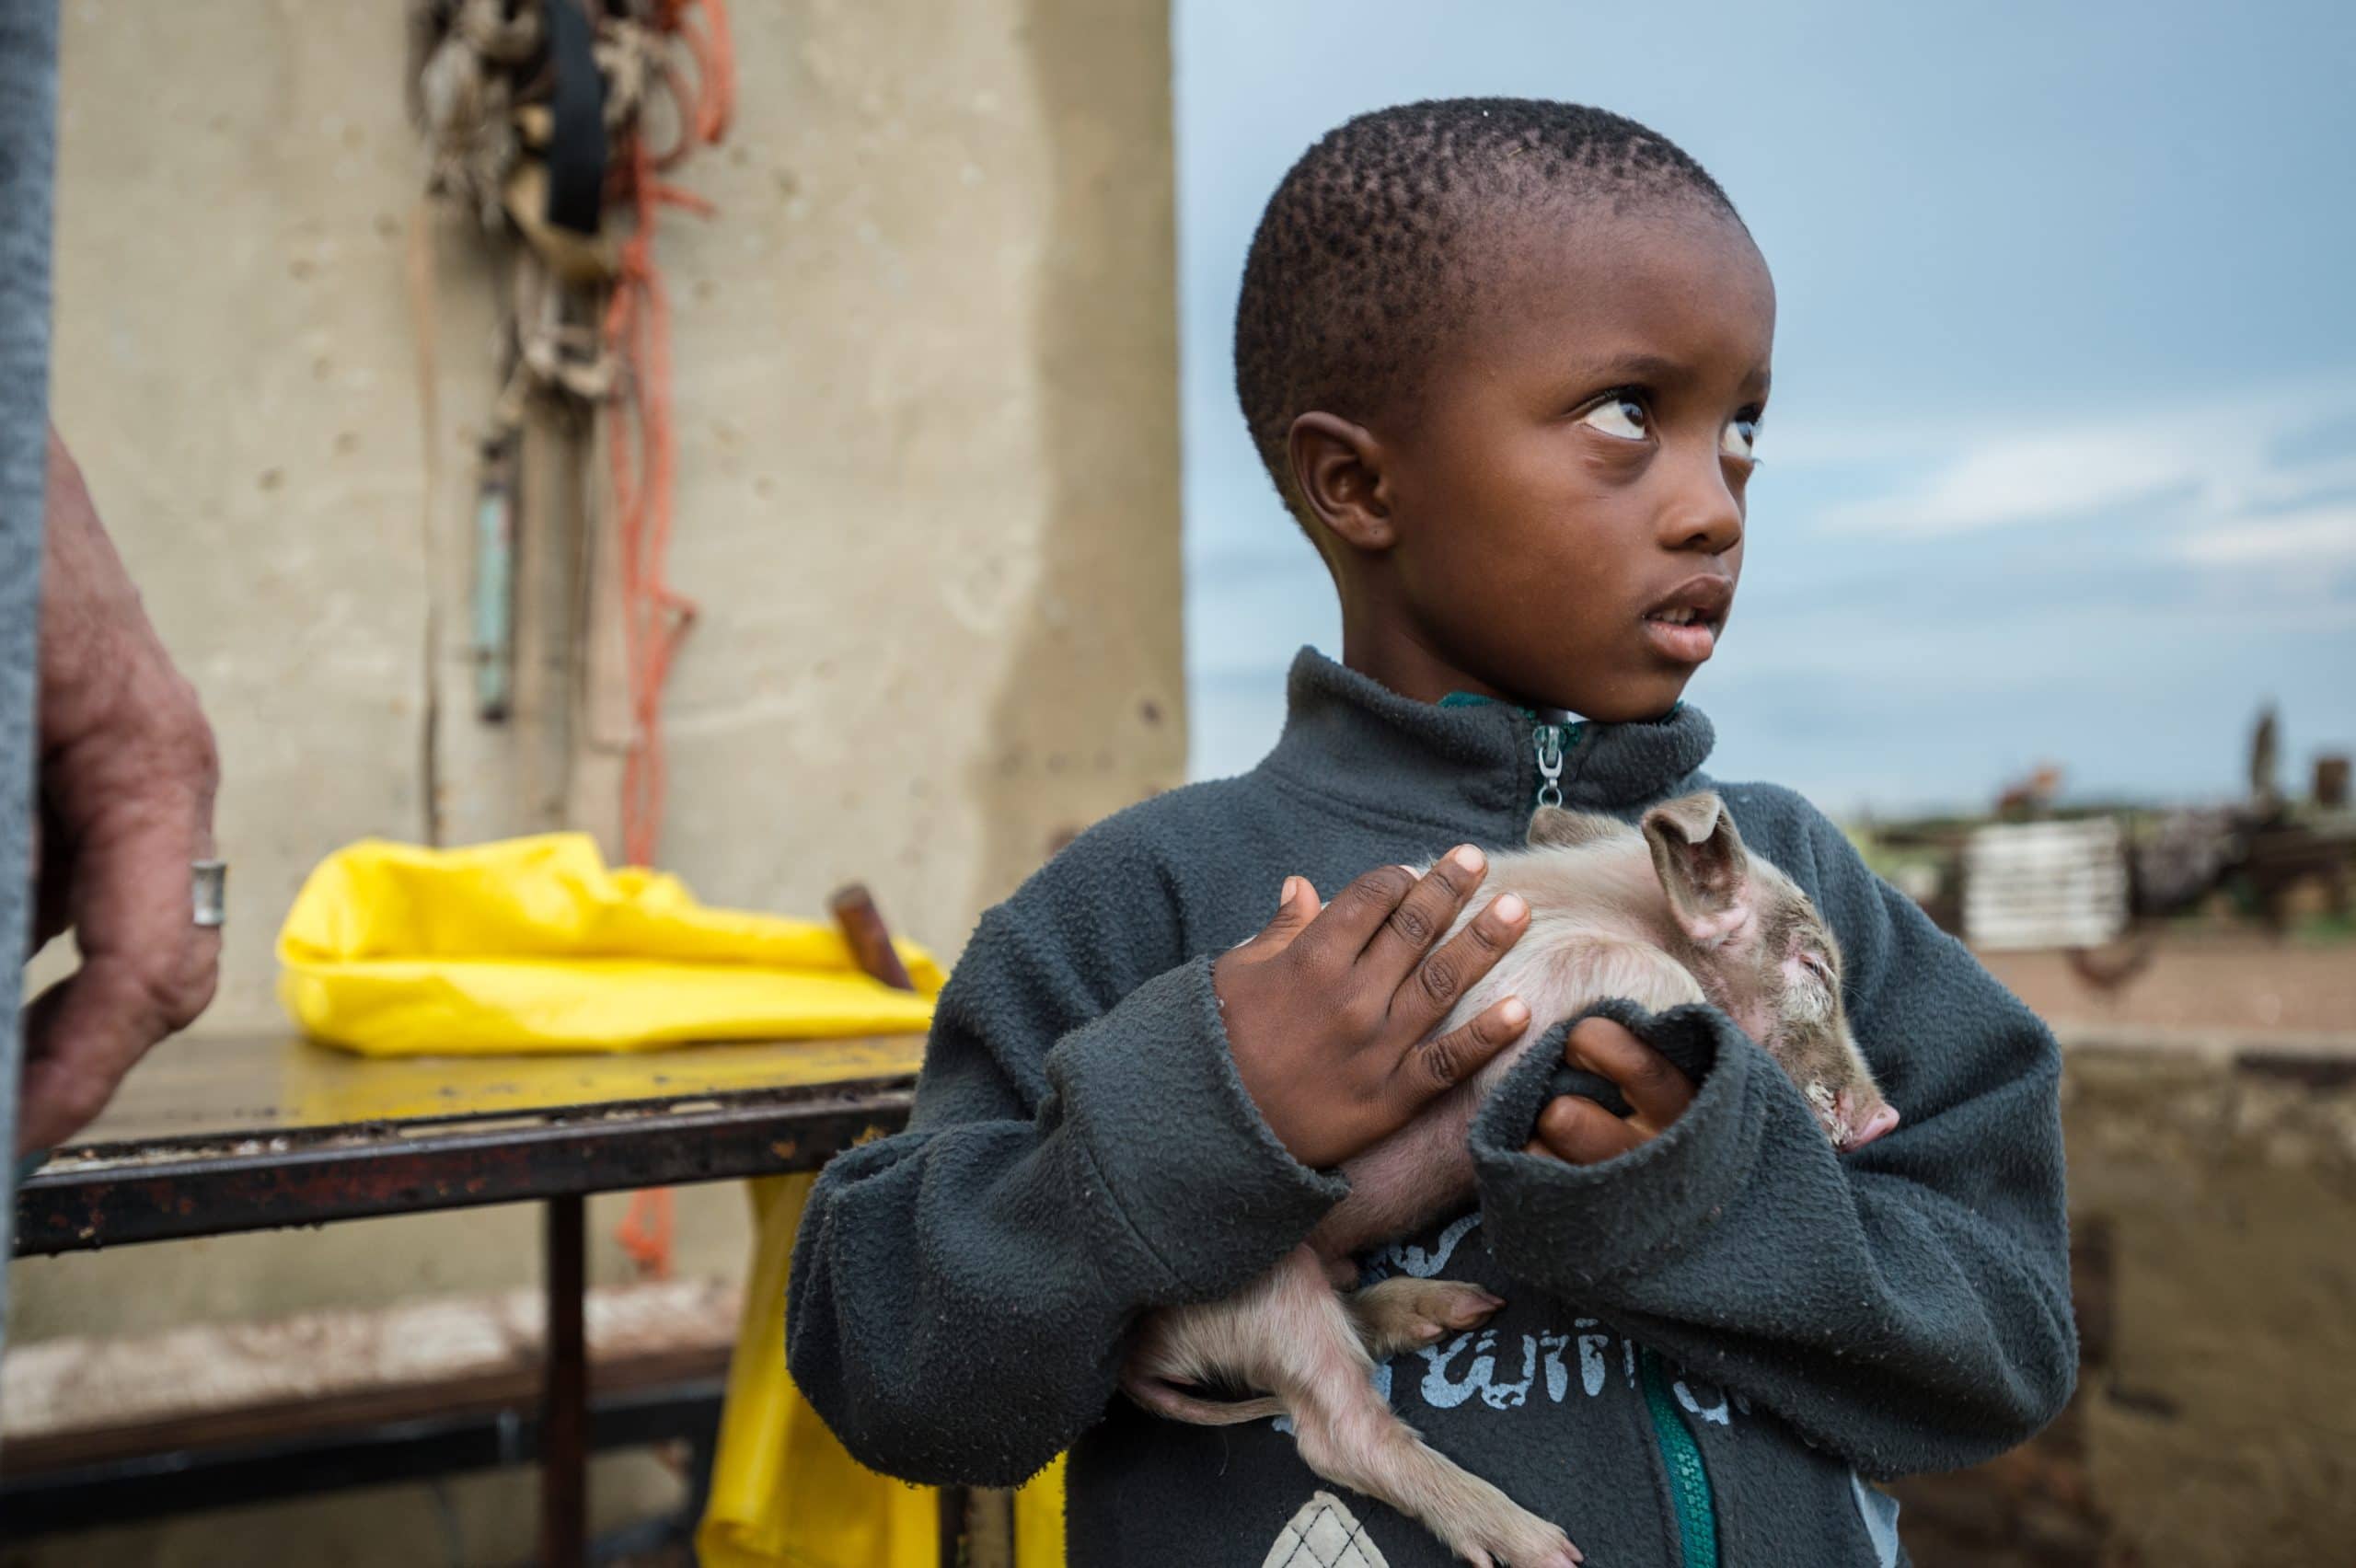 A Child In Soweto Holds An Ailing Piglet, Who Was Rescued From The Randfontein Municipal Dump Site. She Was Rehabilitated And Lives At A Sanctuary In Johannesburg.